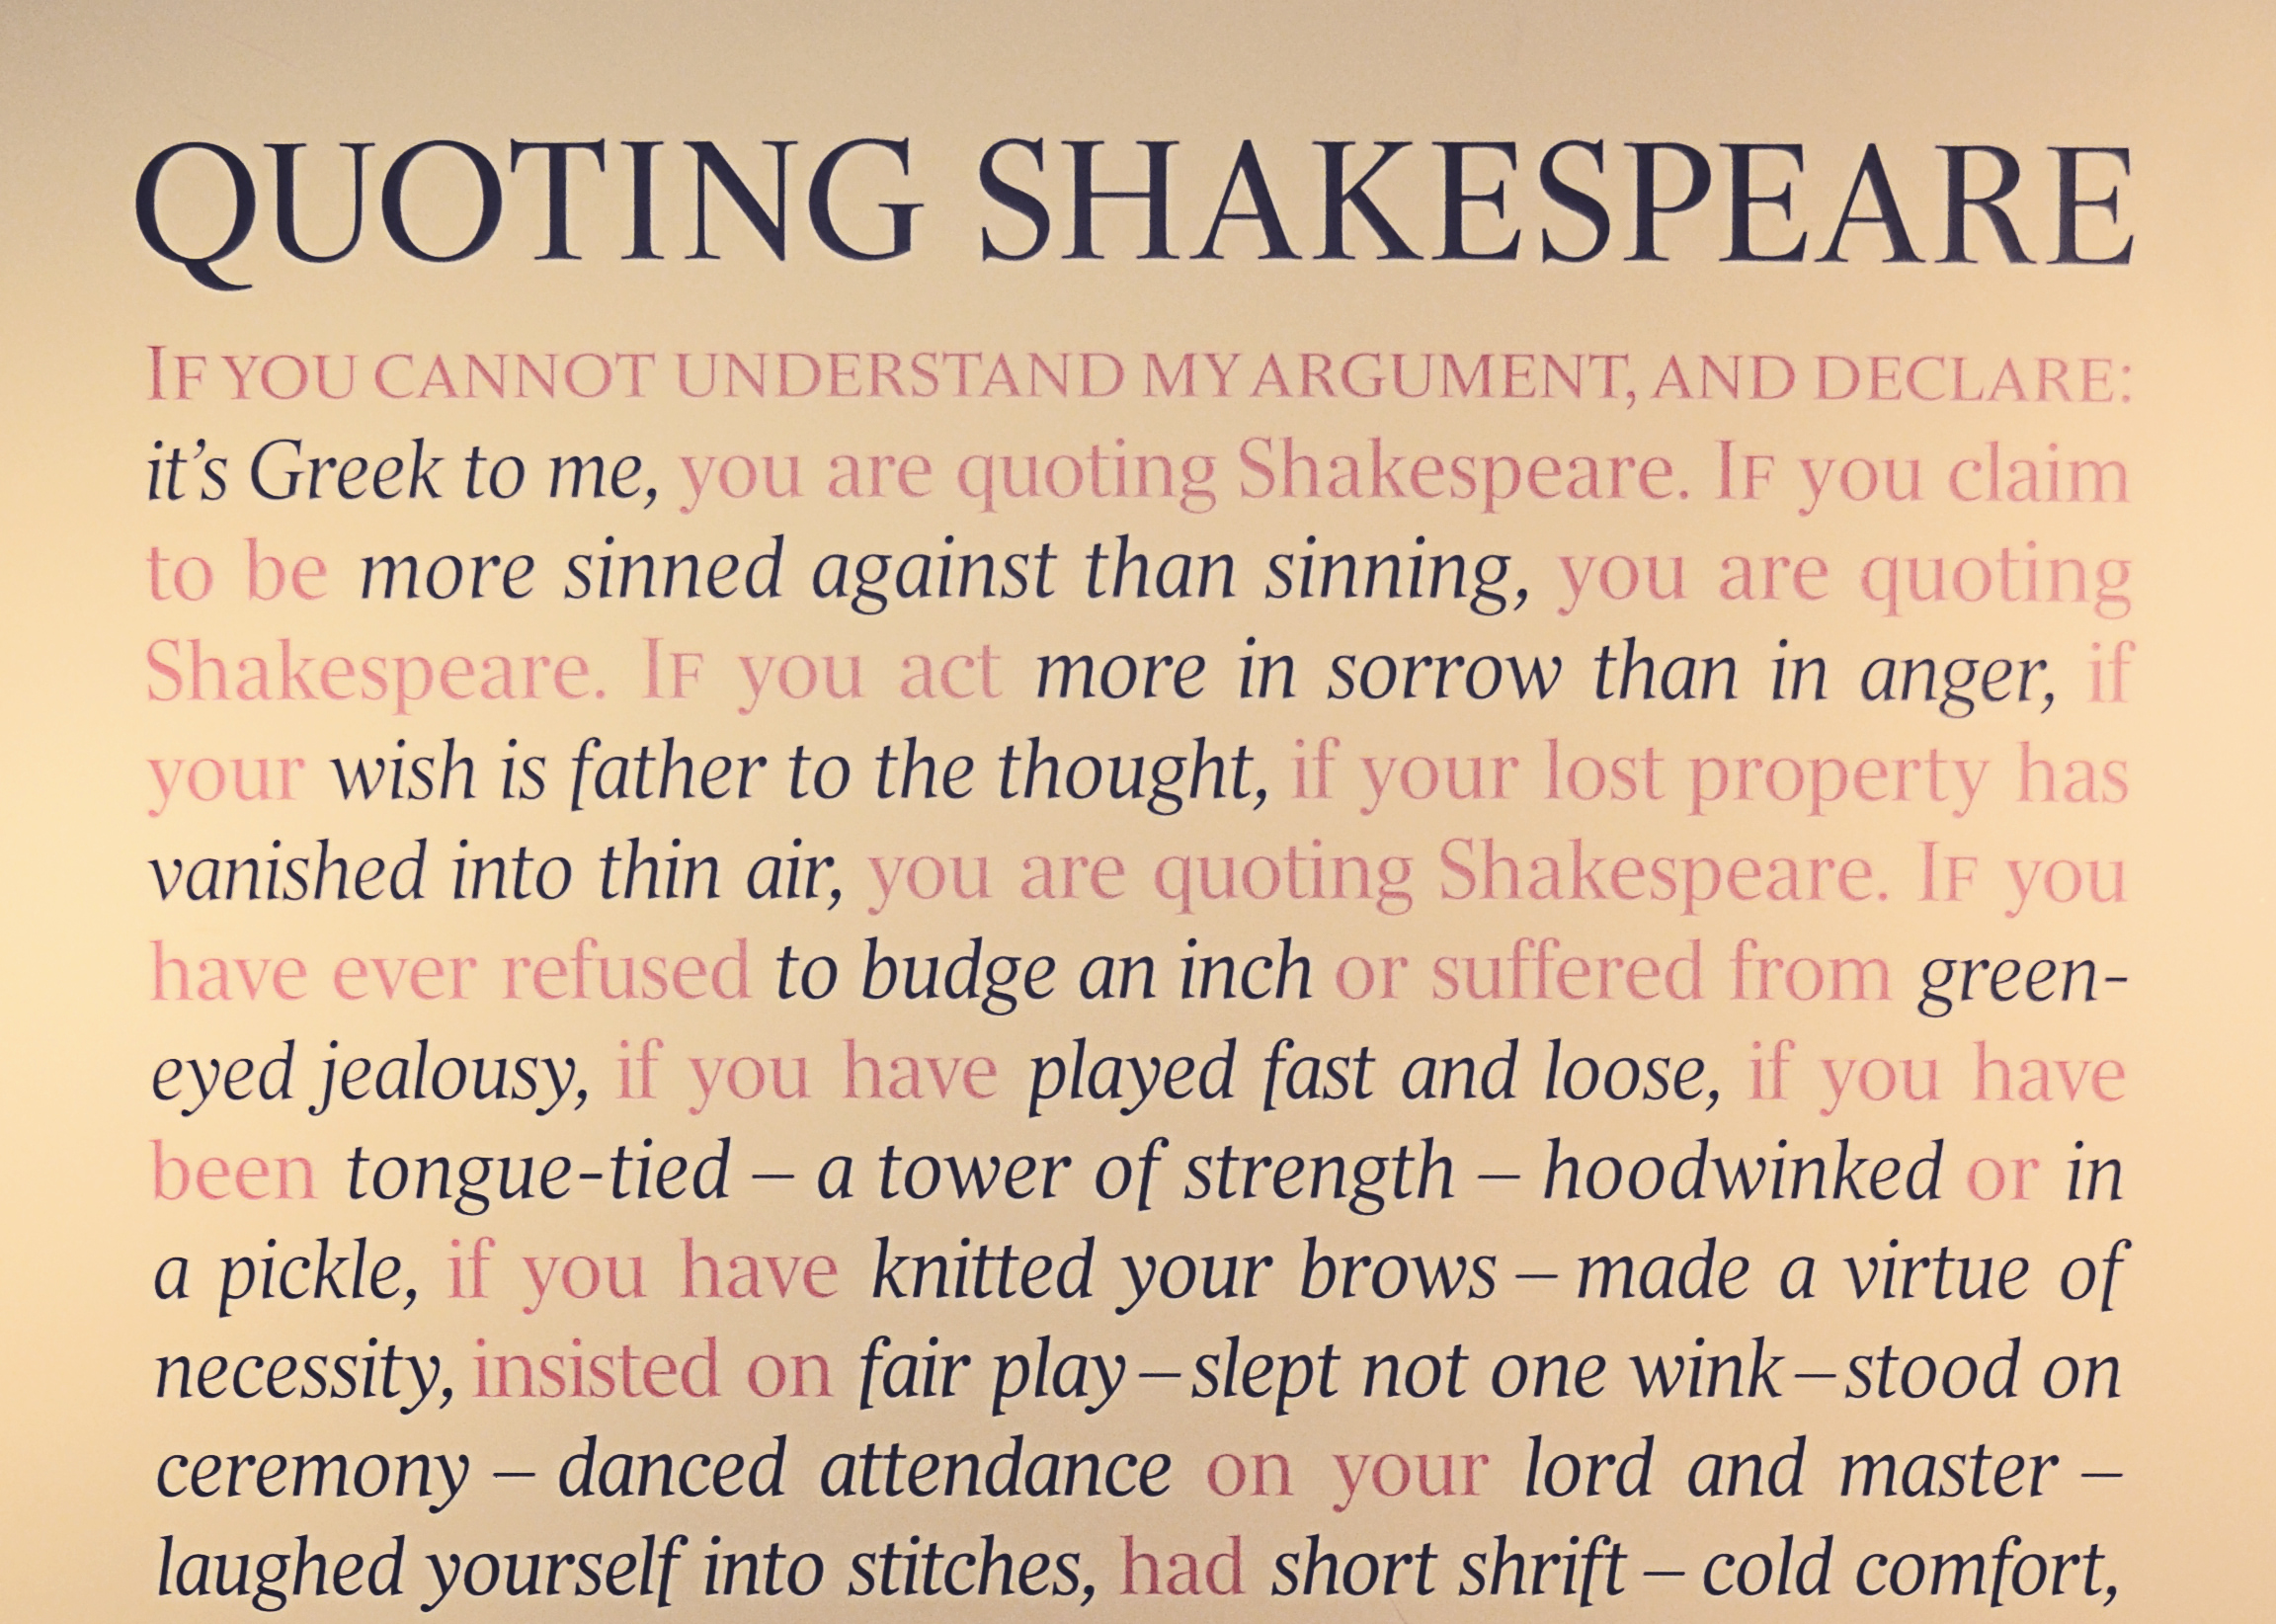 On Quoting Shakespeare